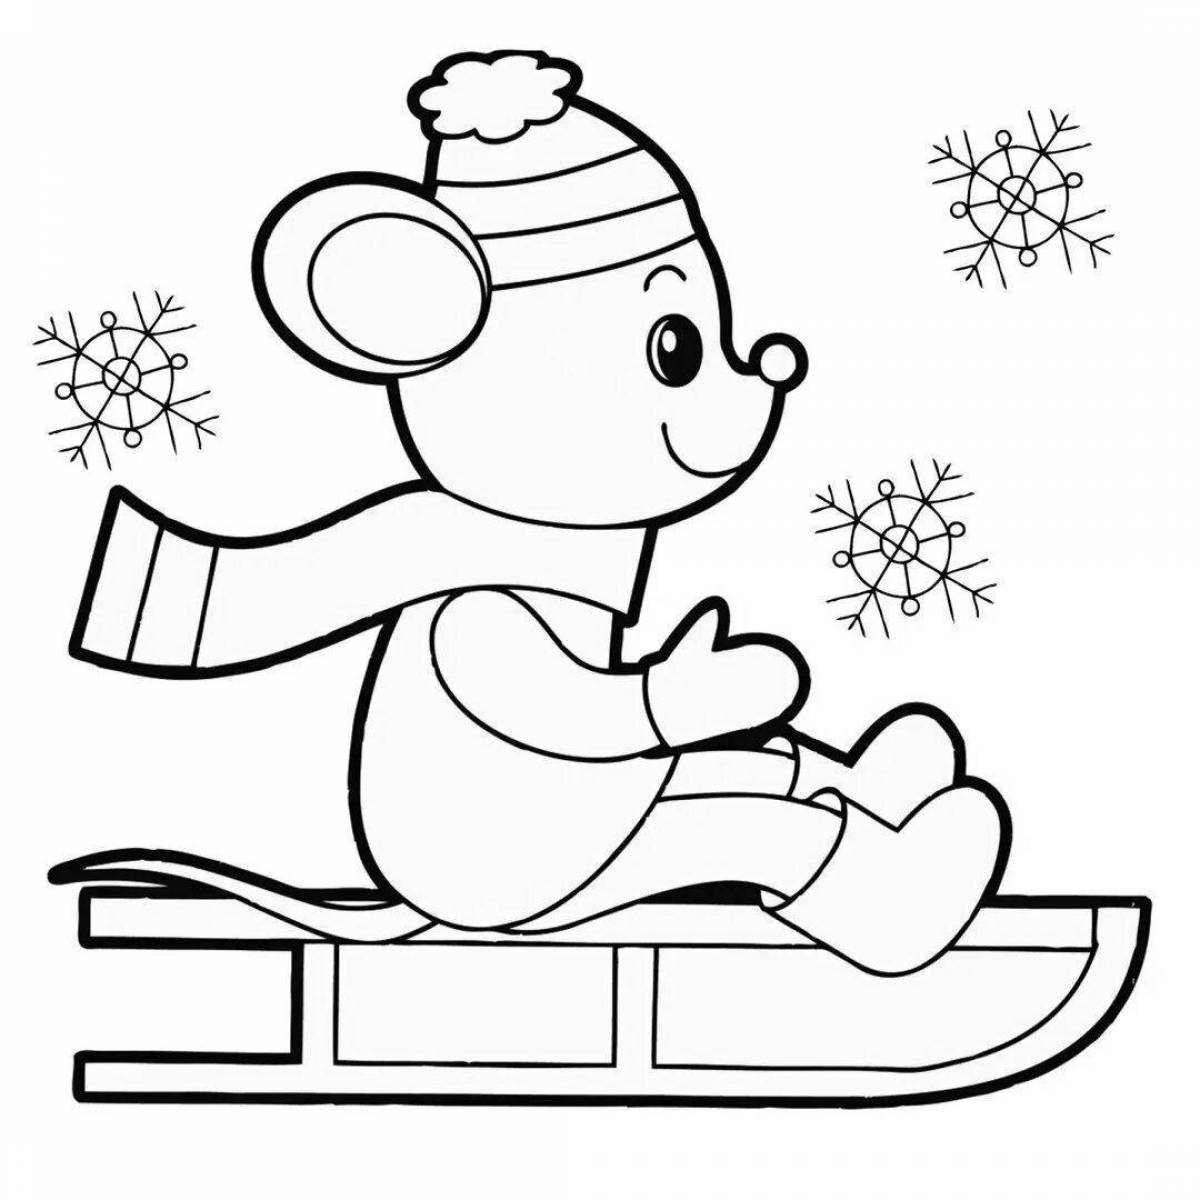 Winter coloring book for children 2-3 years old